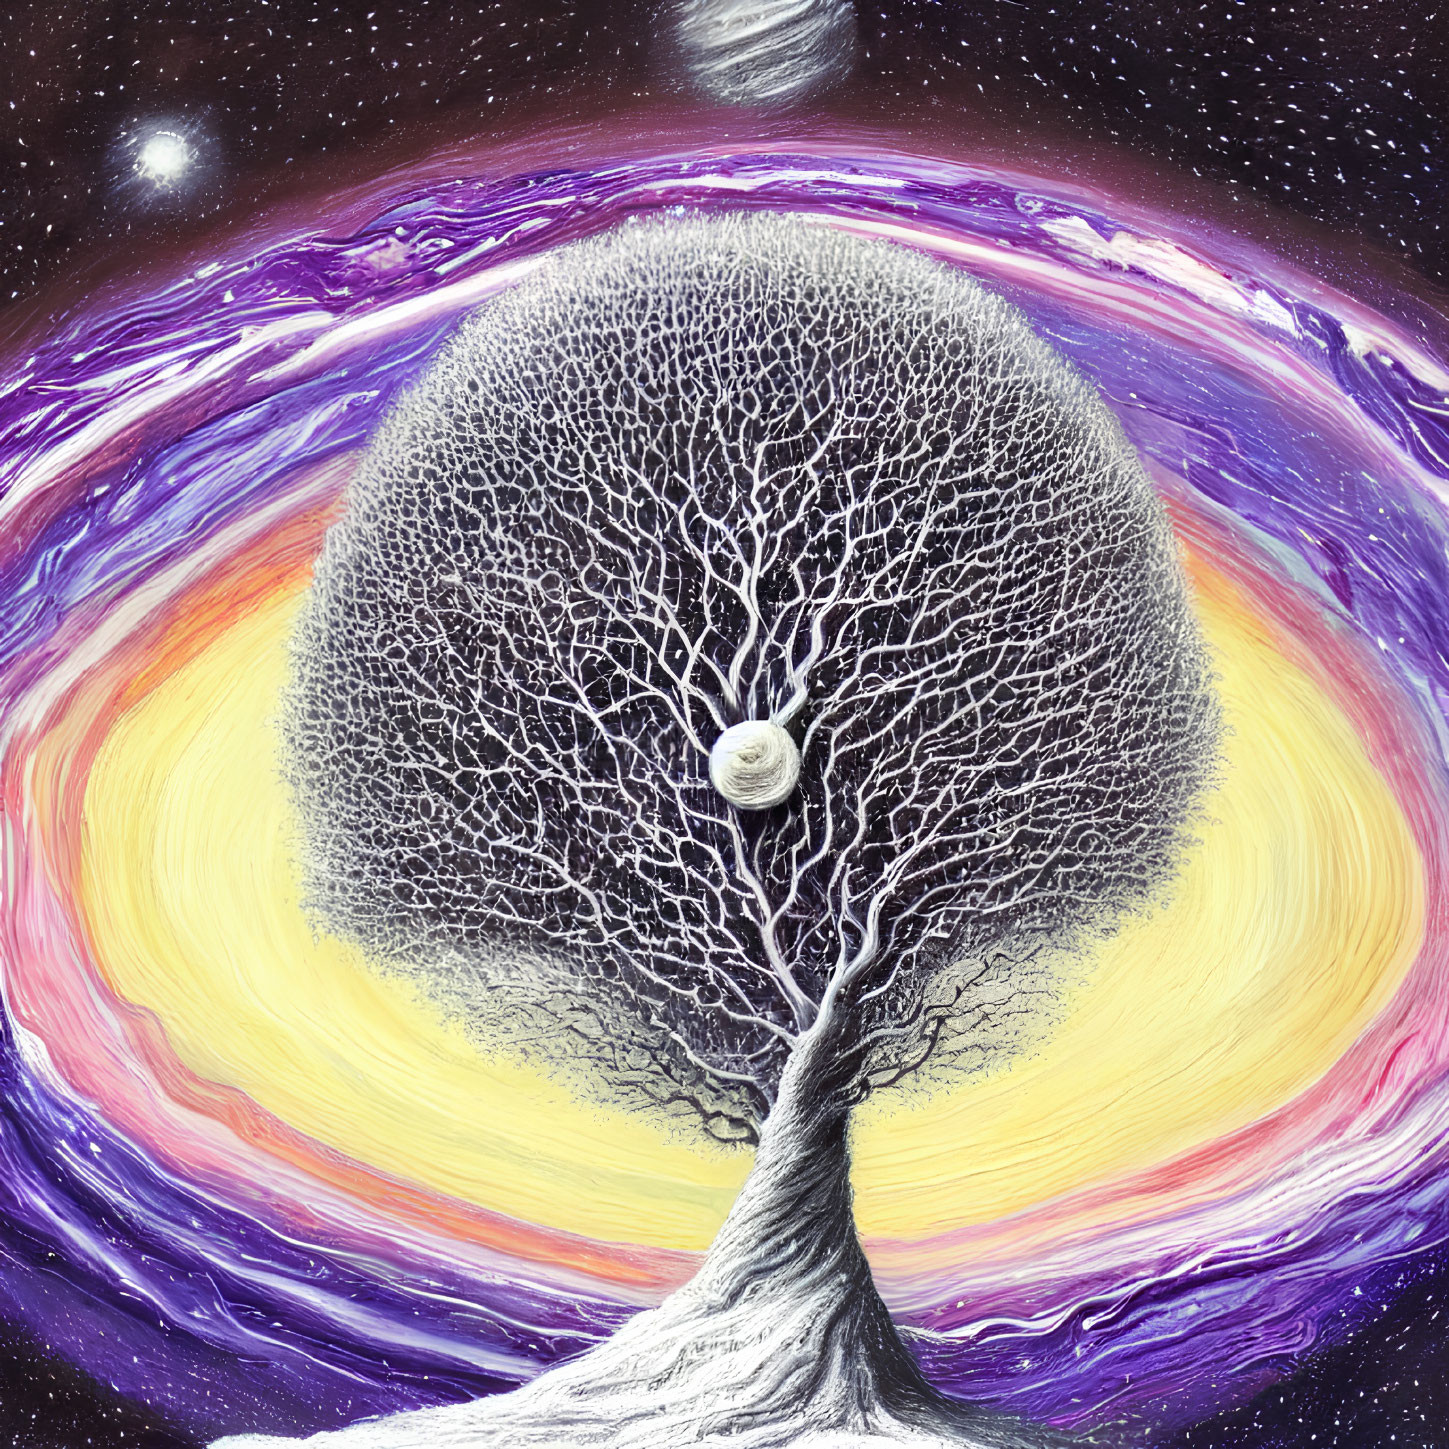 Surreal cosmic tree painting with swirling galaxy backdrop